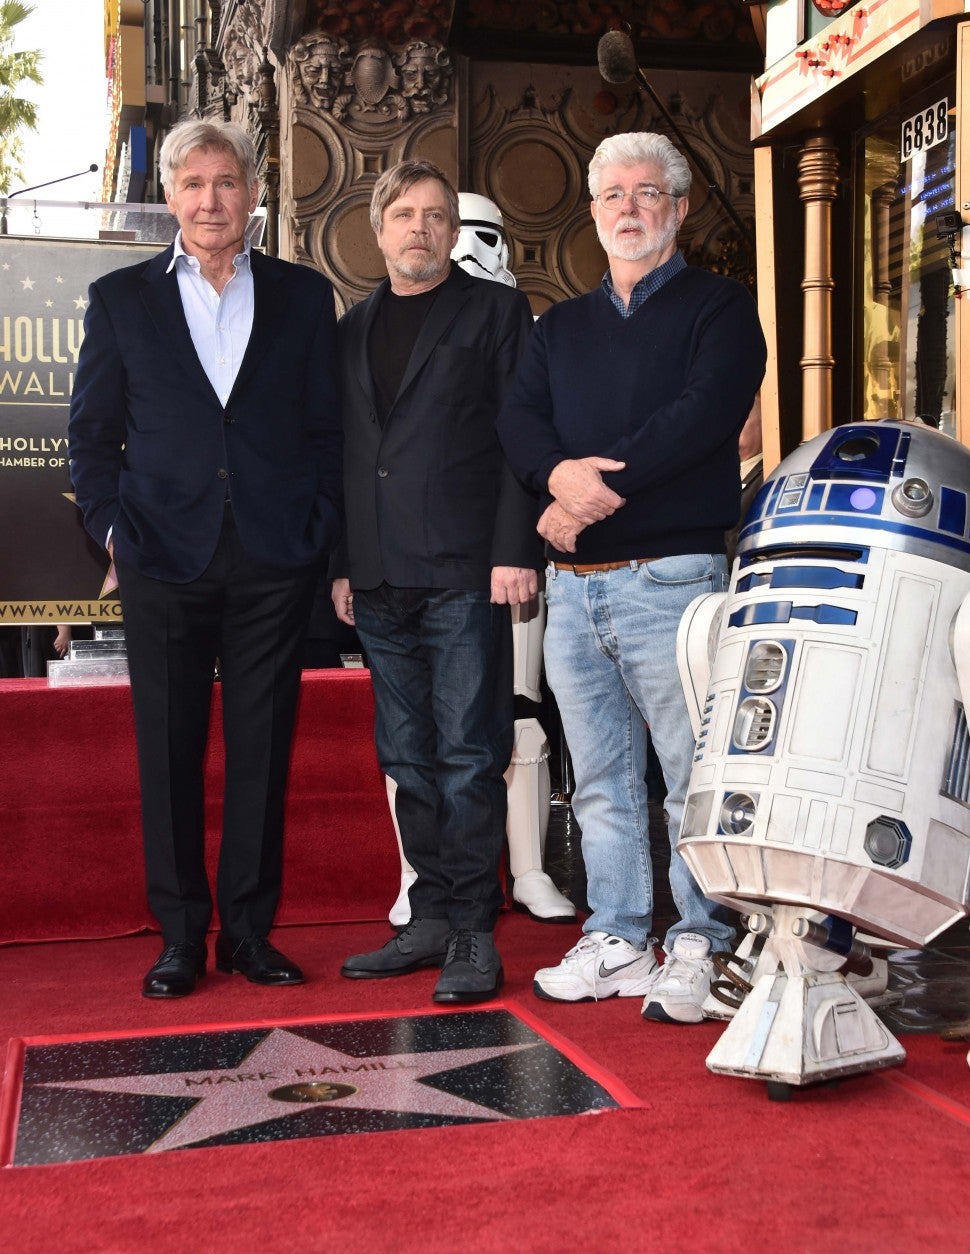 Harrison Ford, Mark Hamill and George Lucas at the Hollywood Walk of Fame Ceremony